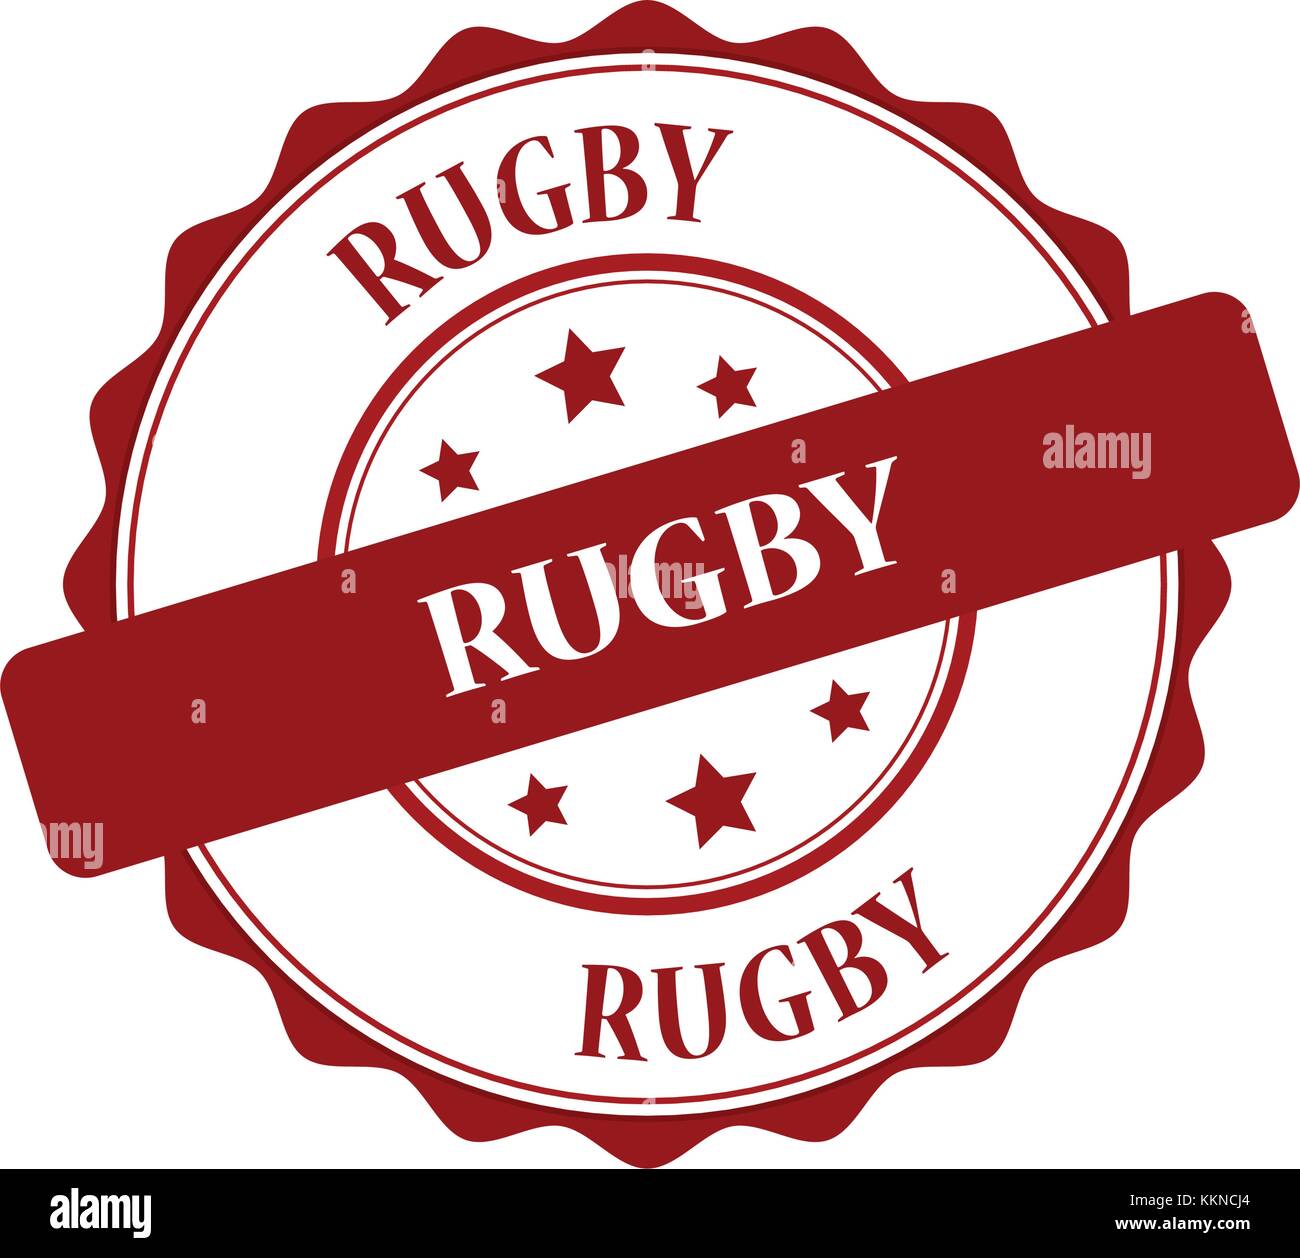 Rugby stamp illustration Stock Vector